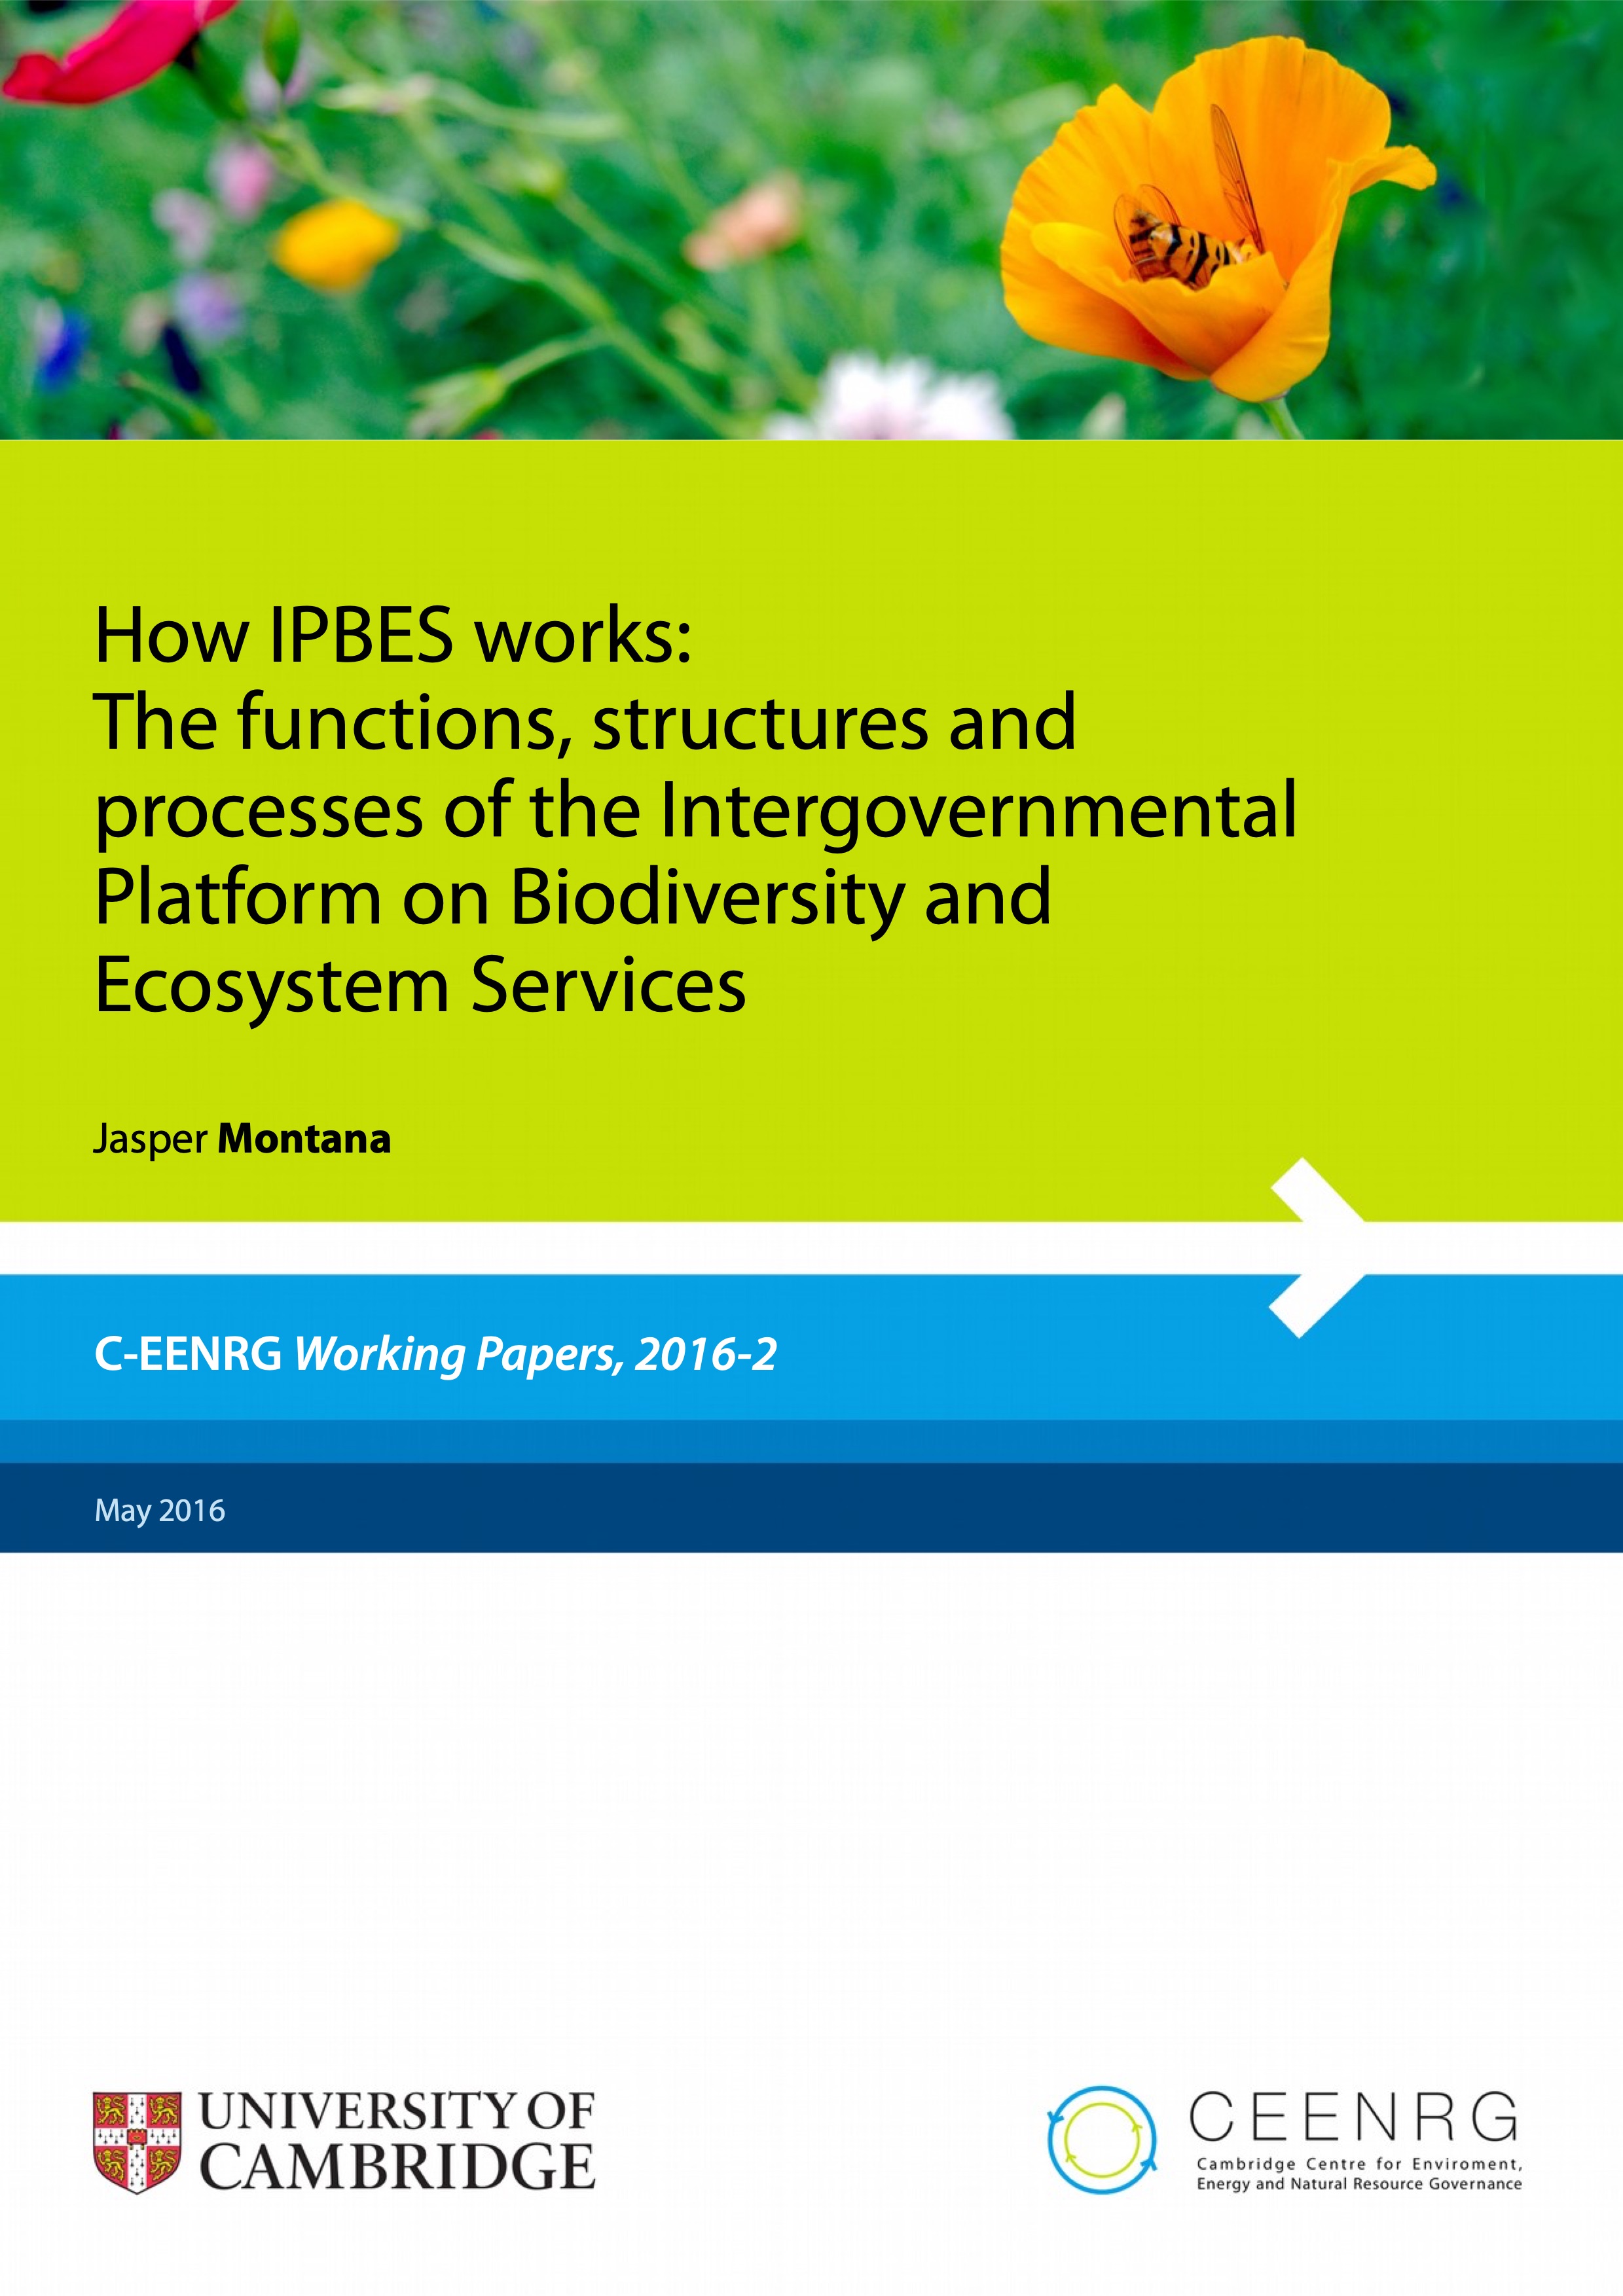 IHow IPBES works: The functions, structures and processes of the Intergovernmental Platform on Biodiversity and Ecosystem Services